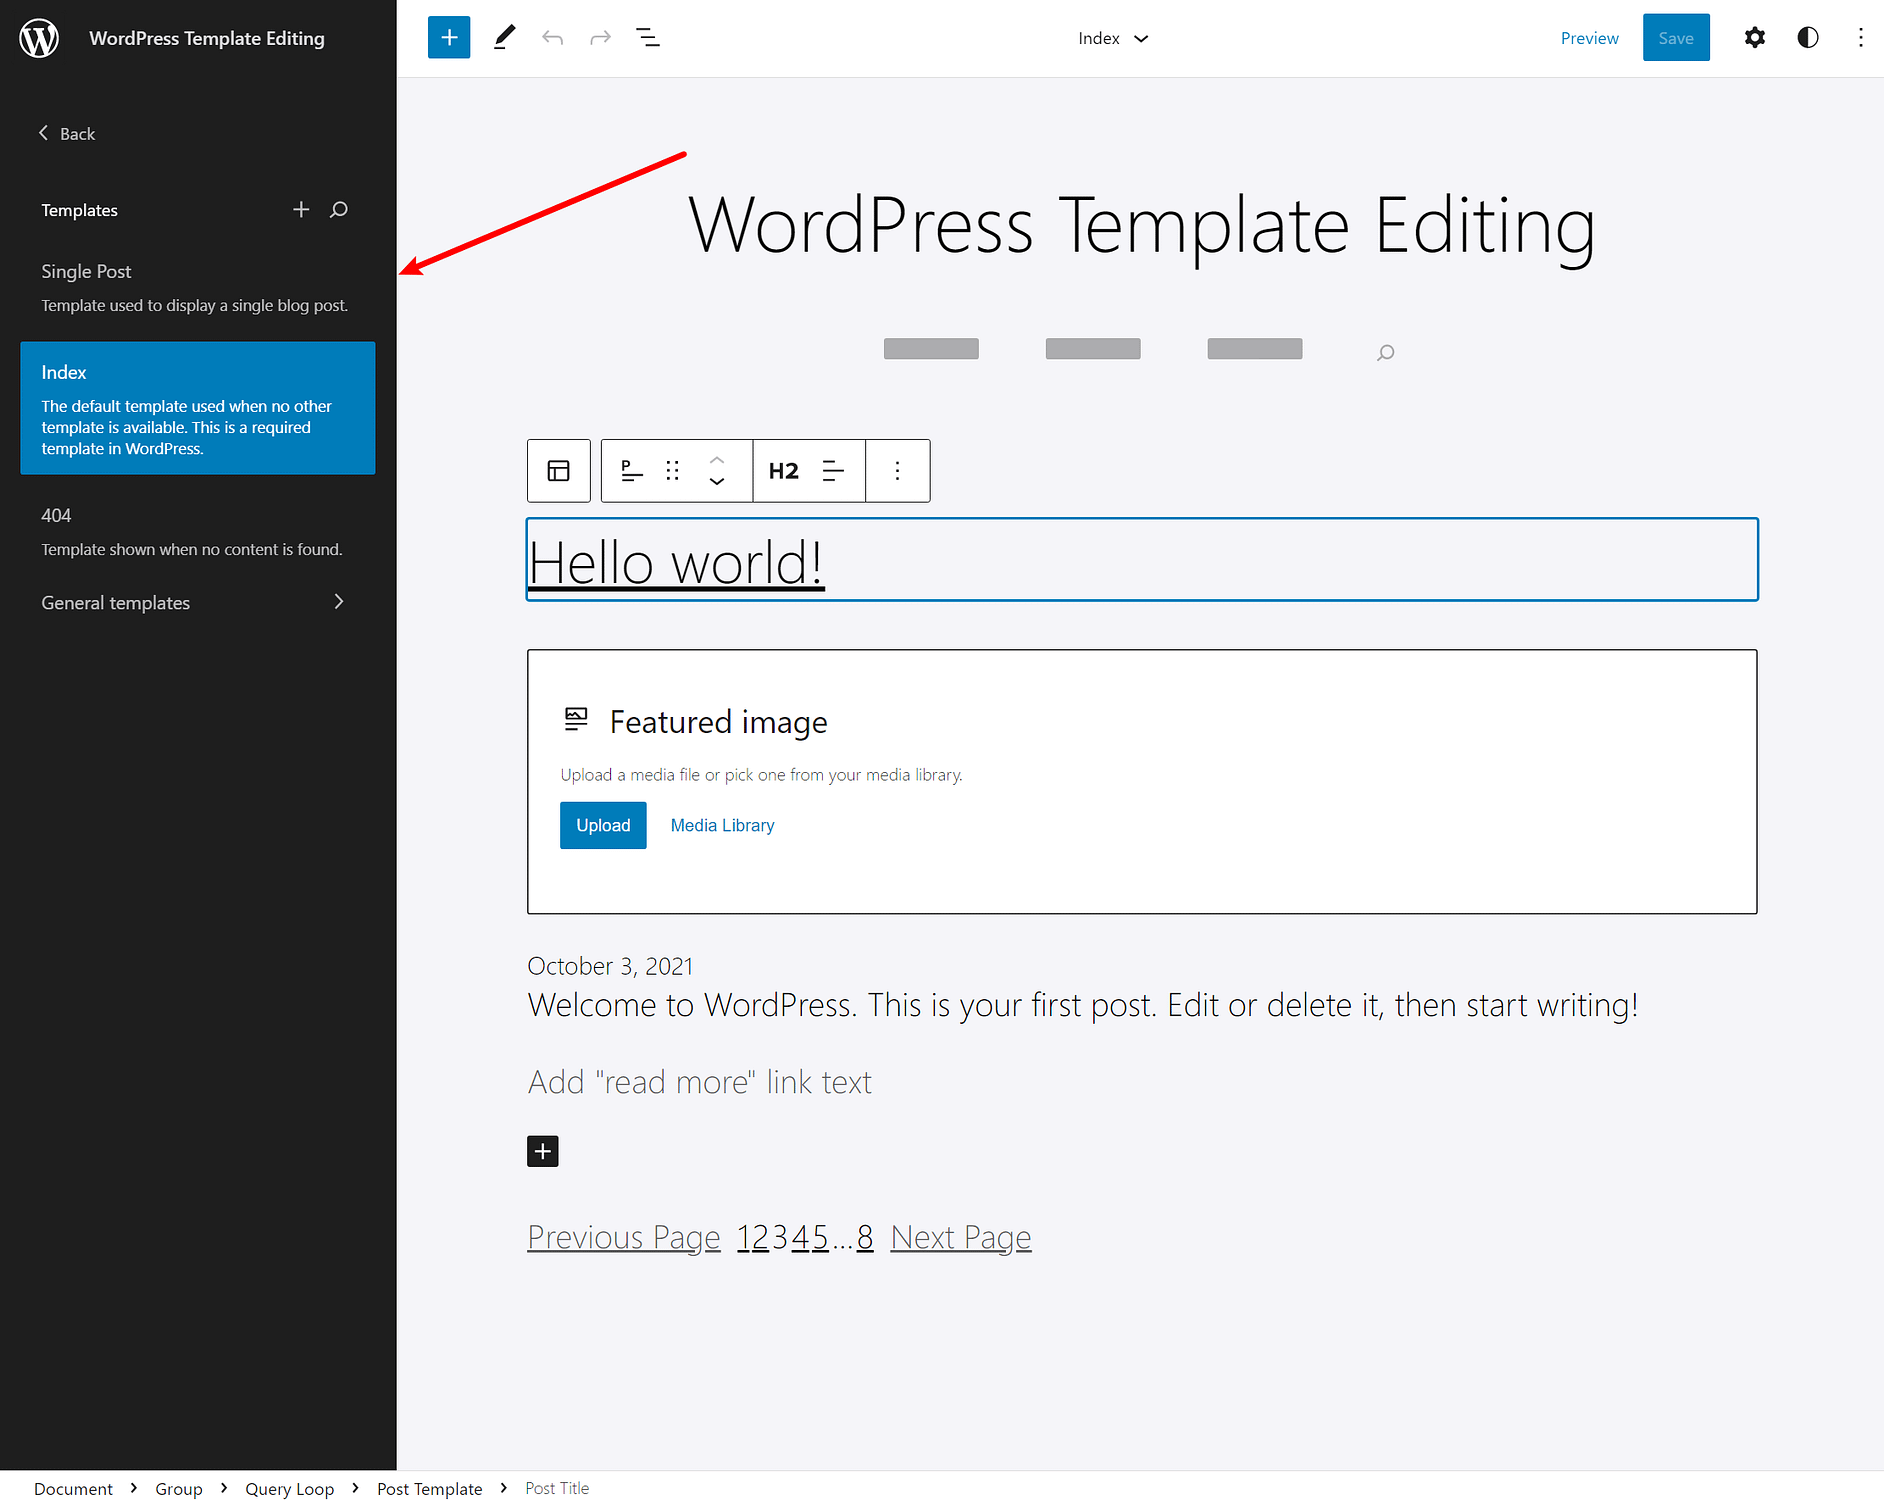 Switching between templates in the WordPress Site Editor